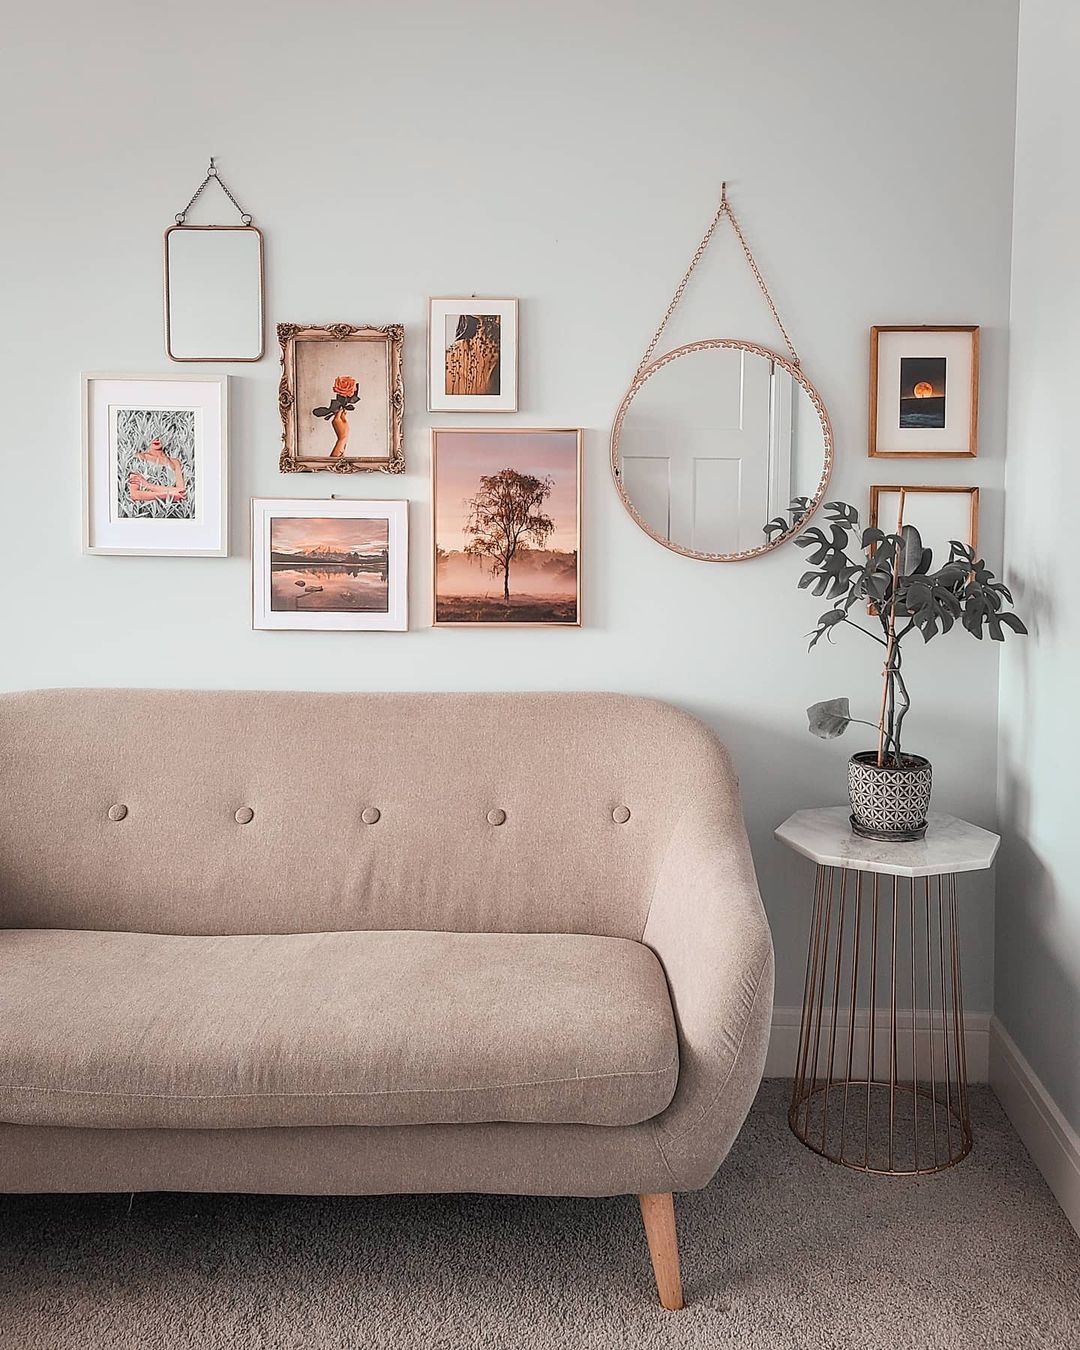 Gallery Wall Layout: How to Make a Living Room Gallery Wall - VIV